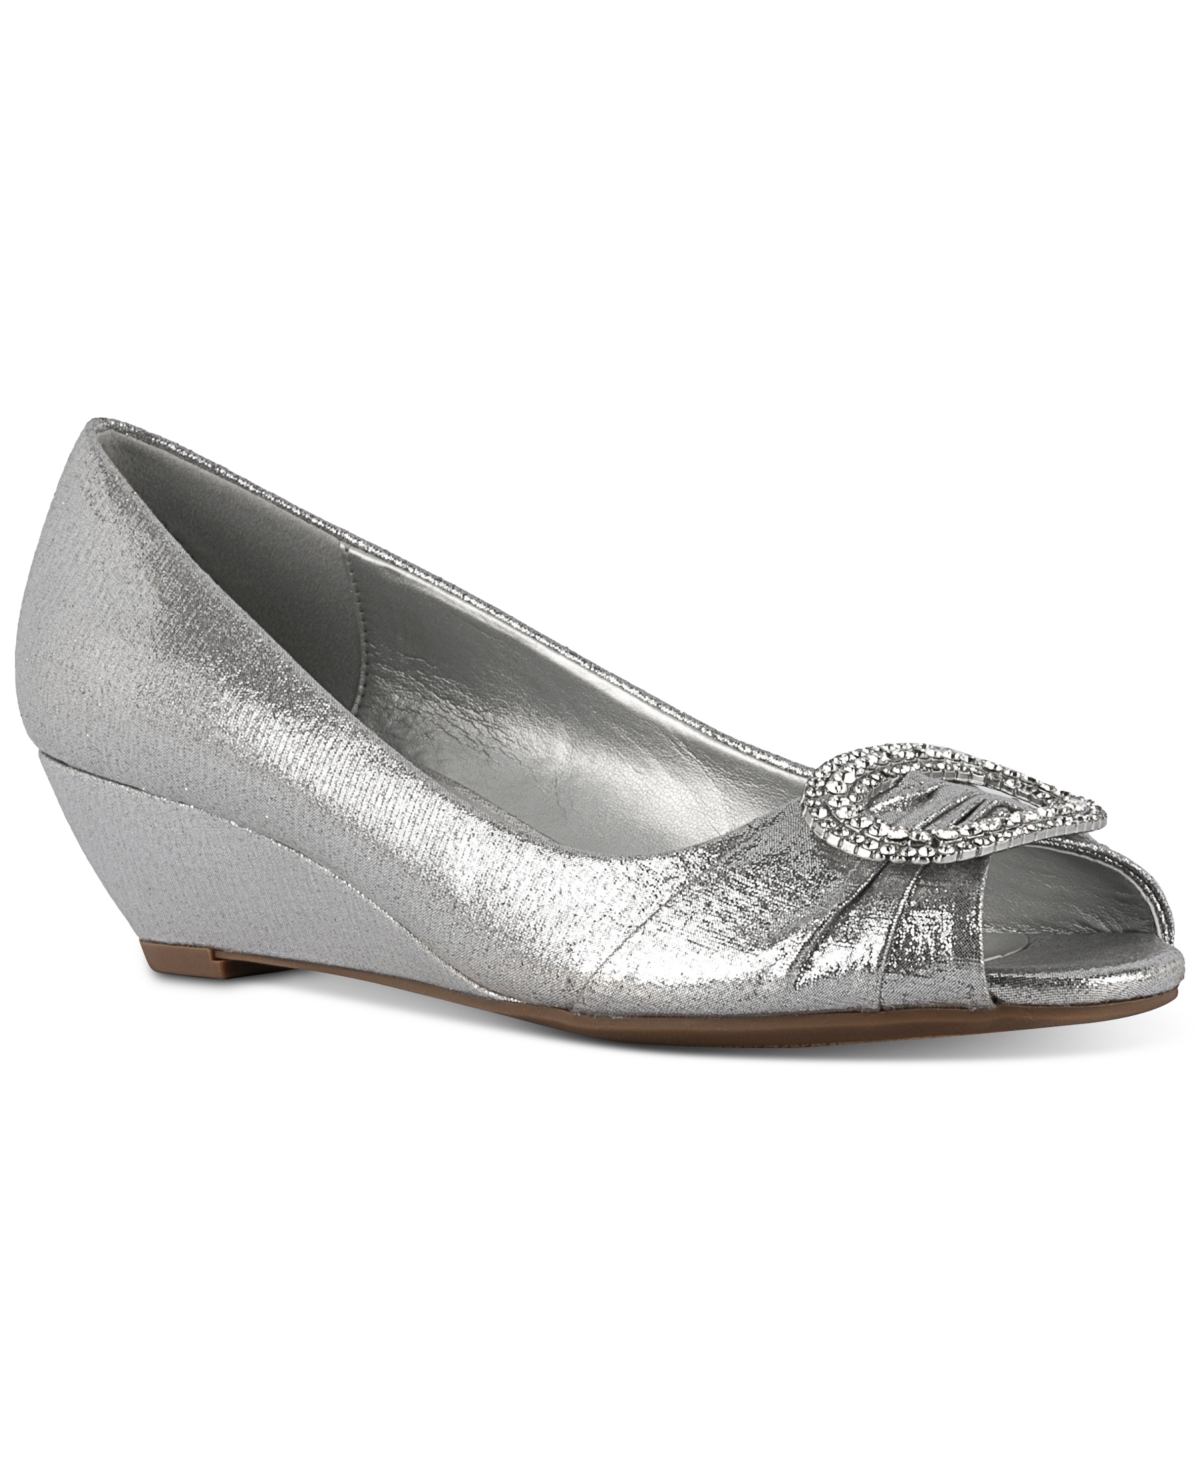 Ramonaa Embellished Evening Wedge Pumps, Created for Macy's - Silver